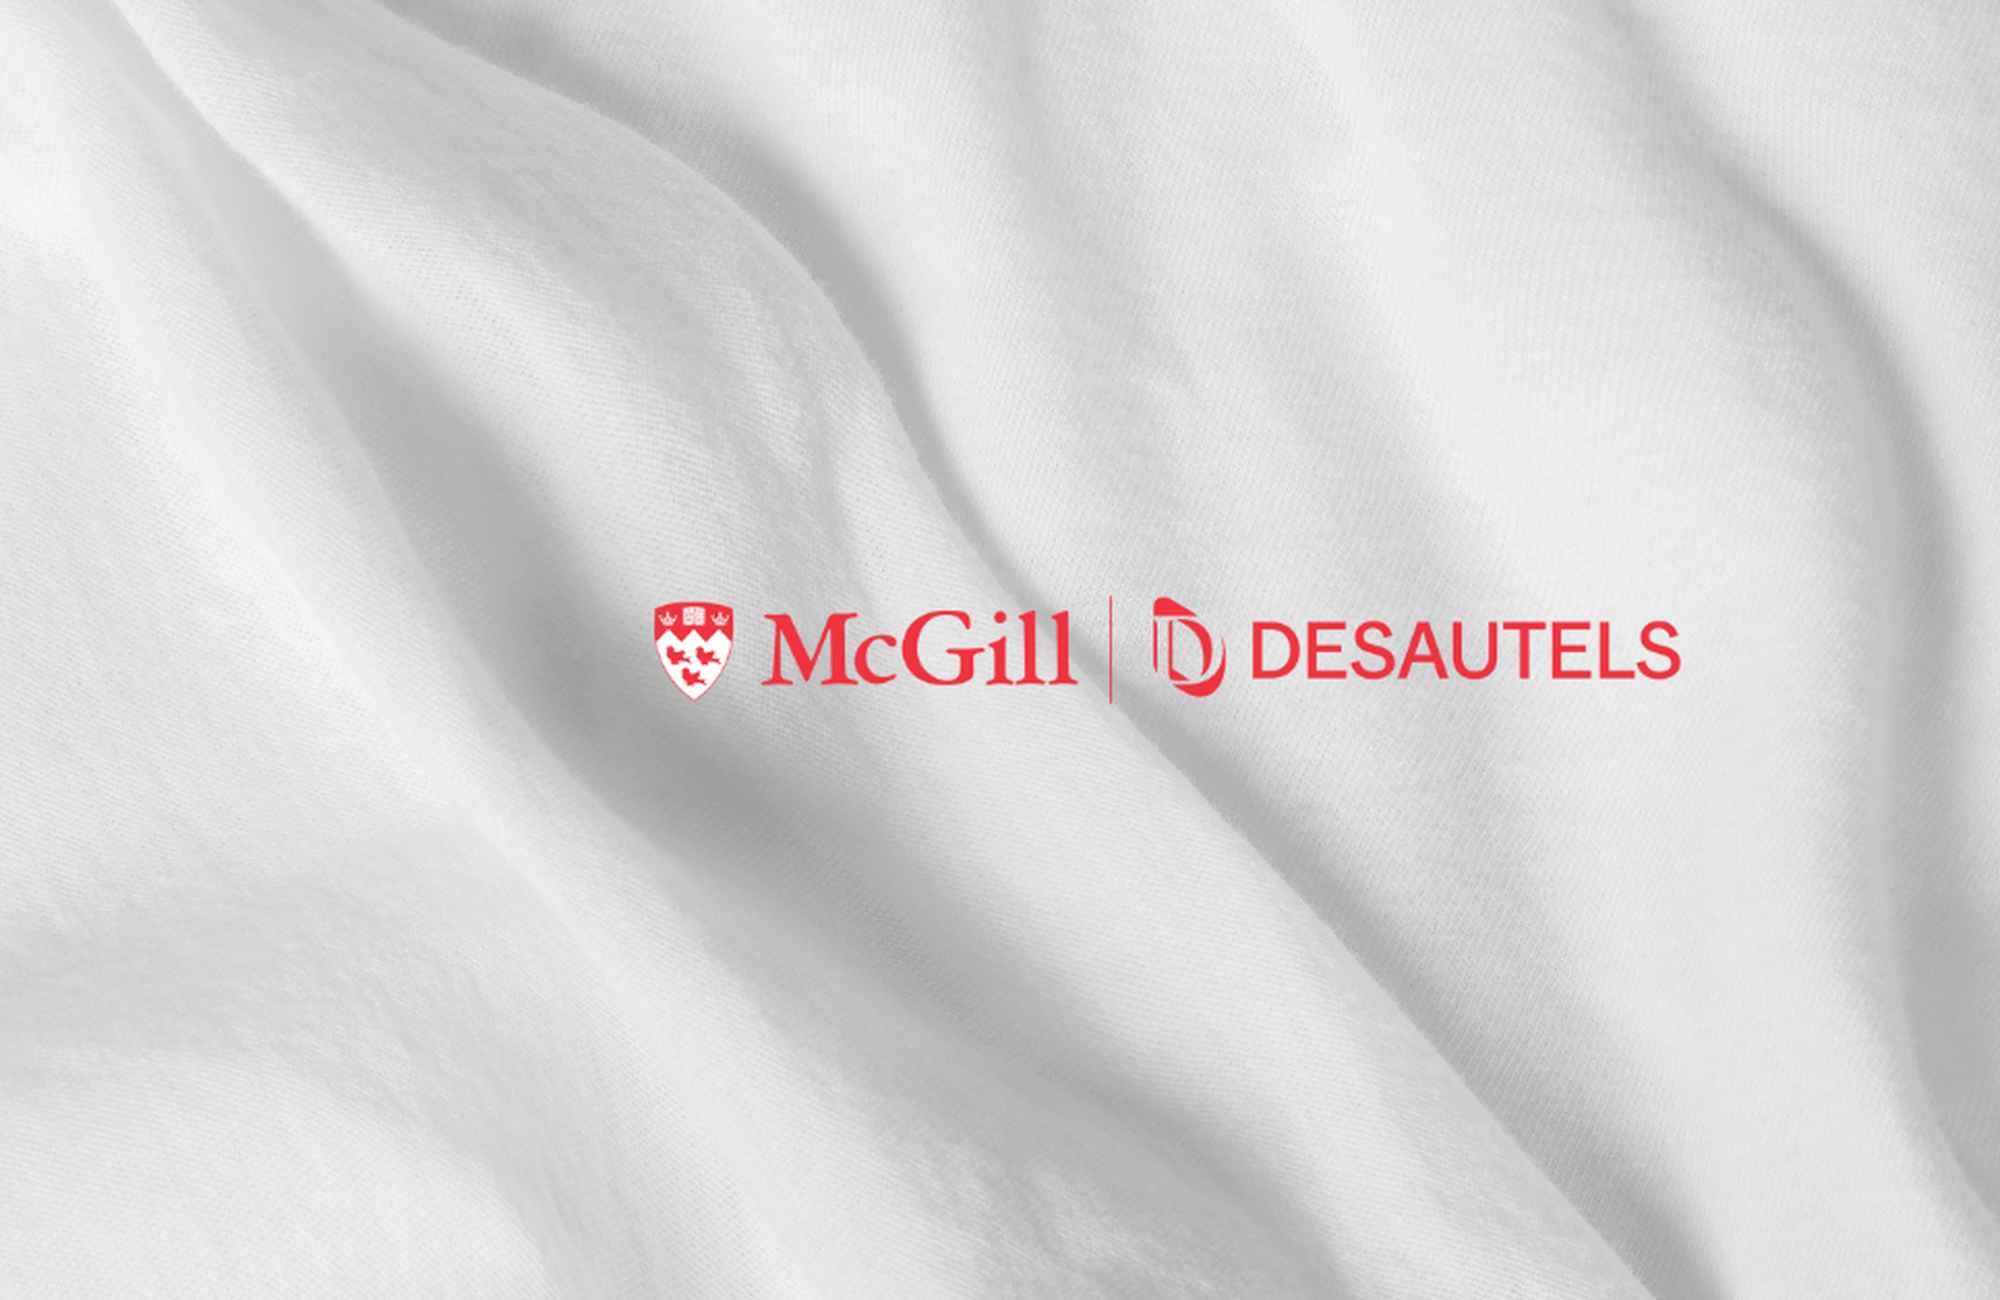 Gildan Donate $150,000 to Canadian Students to Address Global Sustainability Issues Through McGill